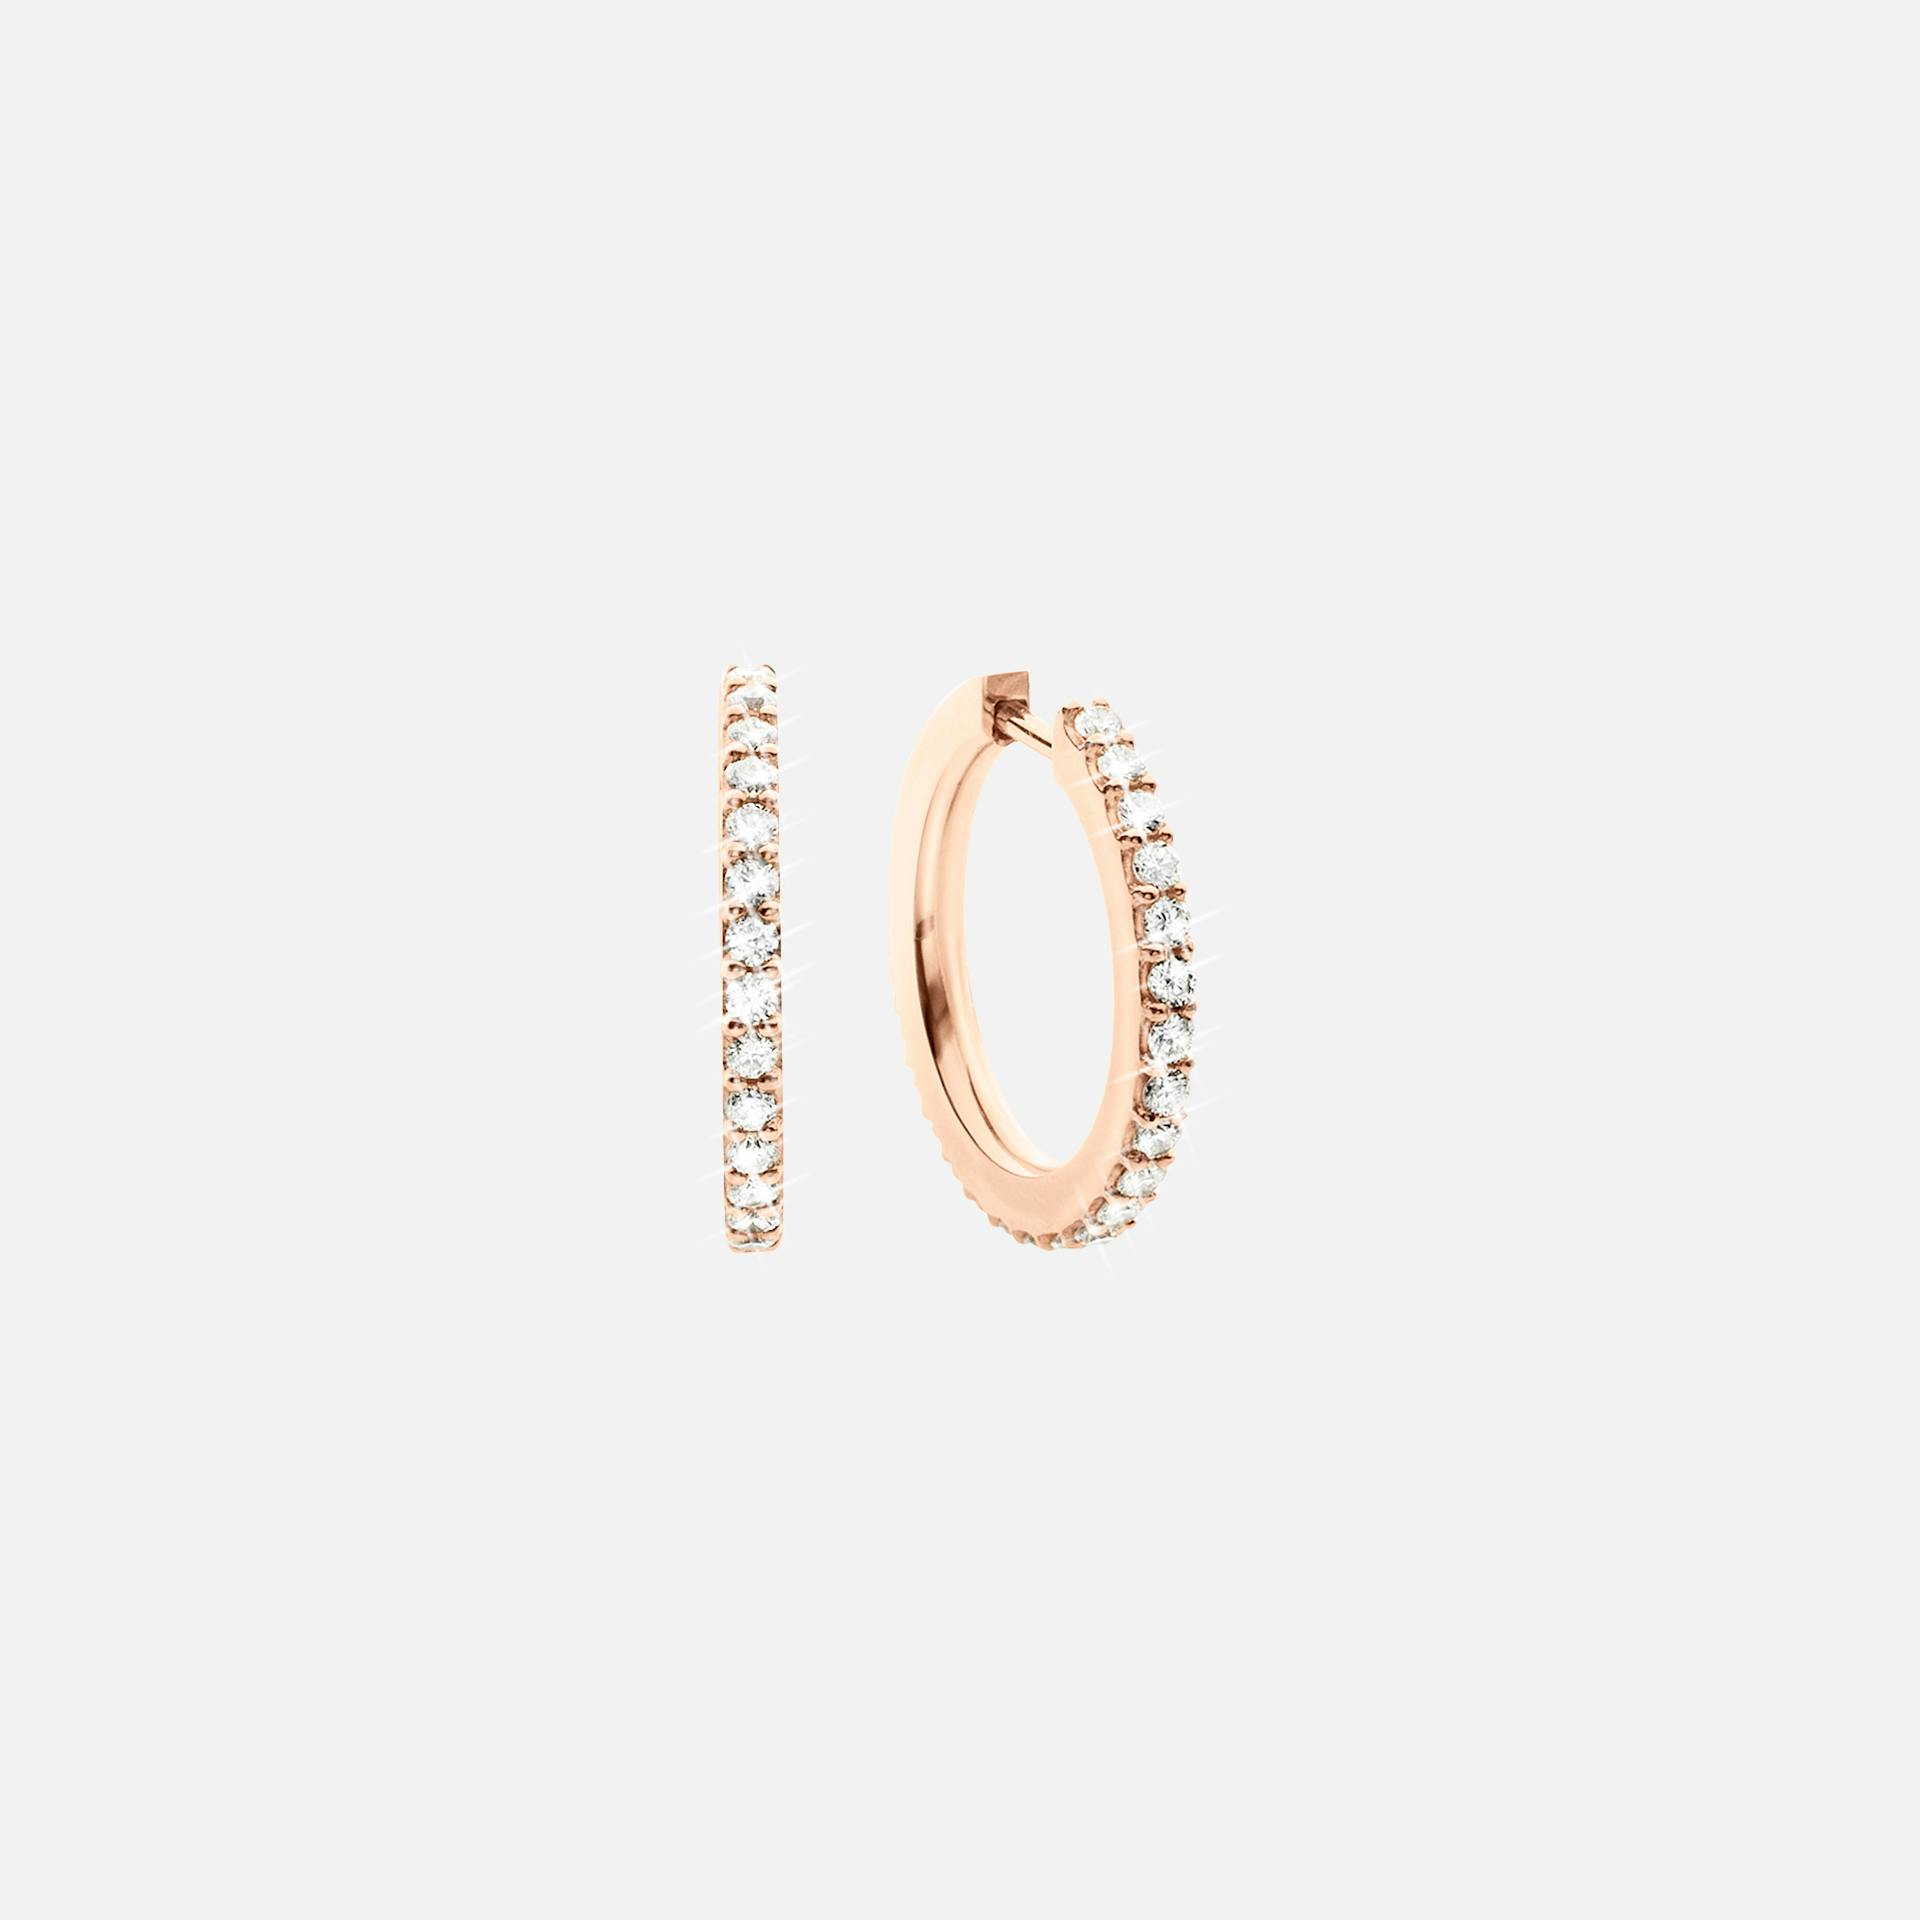 Love Bands Creol Earrings Small in Rose Gold with Diamonds  |  Ole Lynggaard Copenhagen 